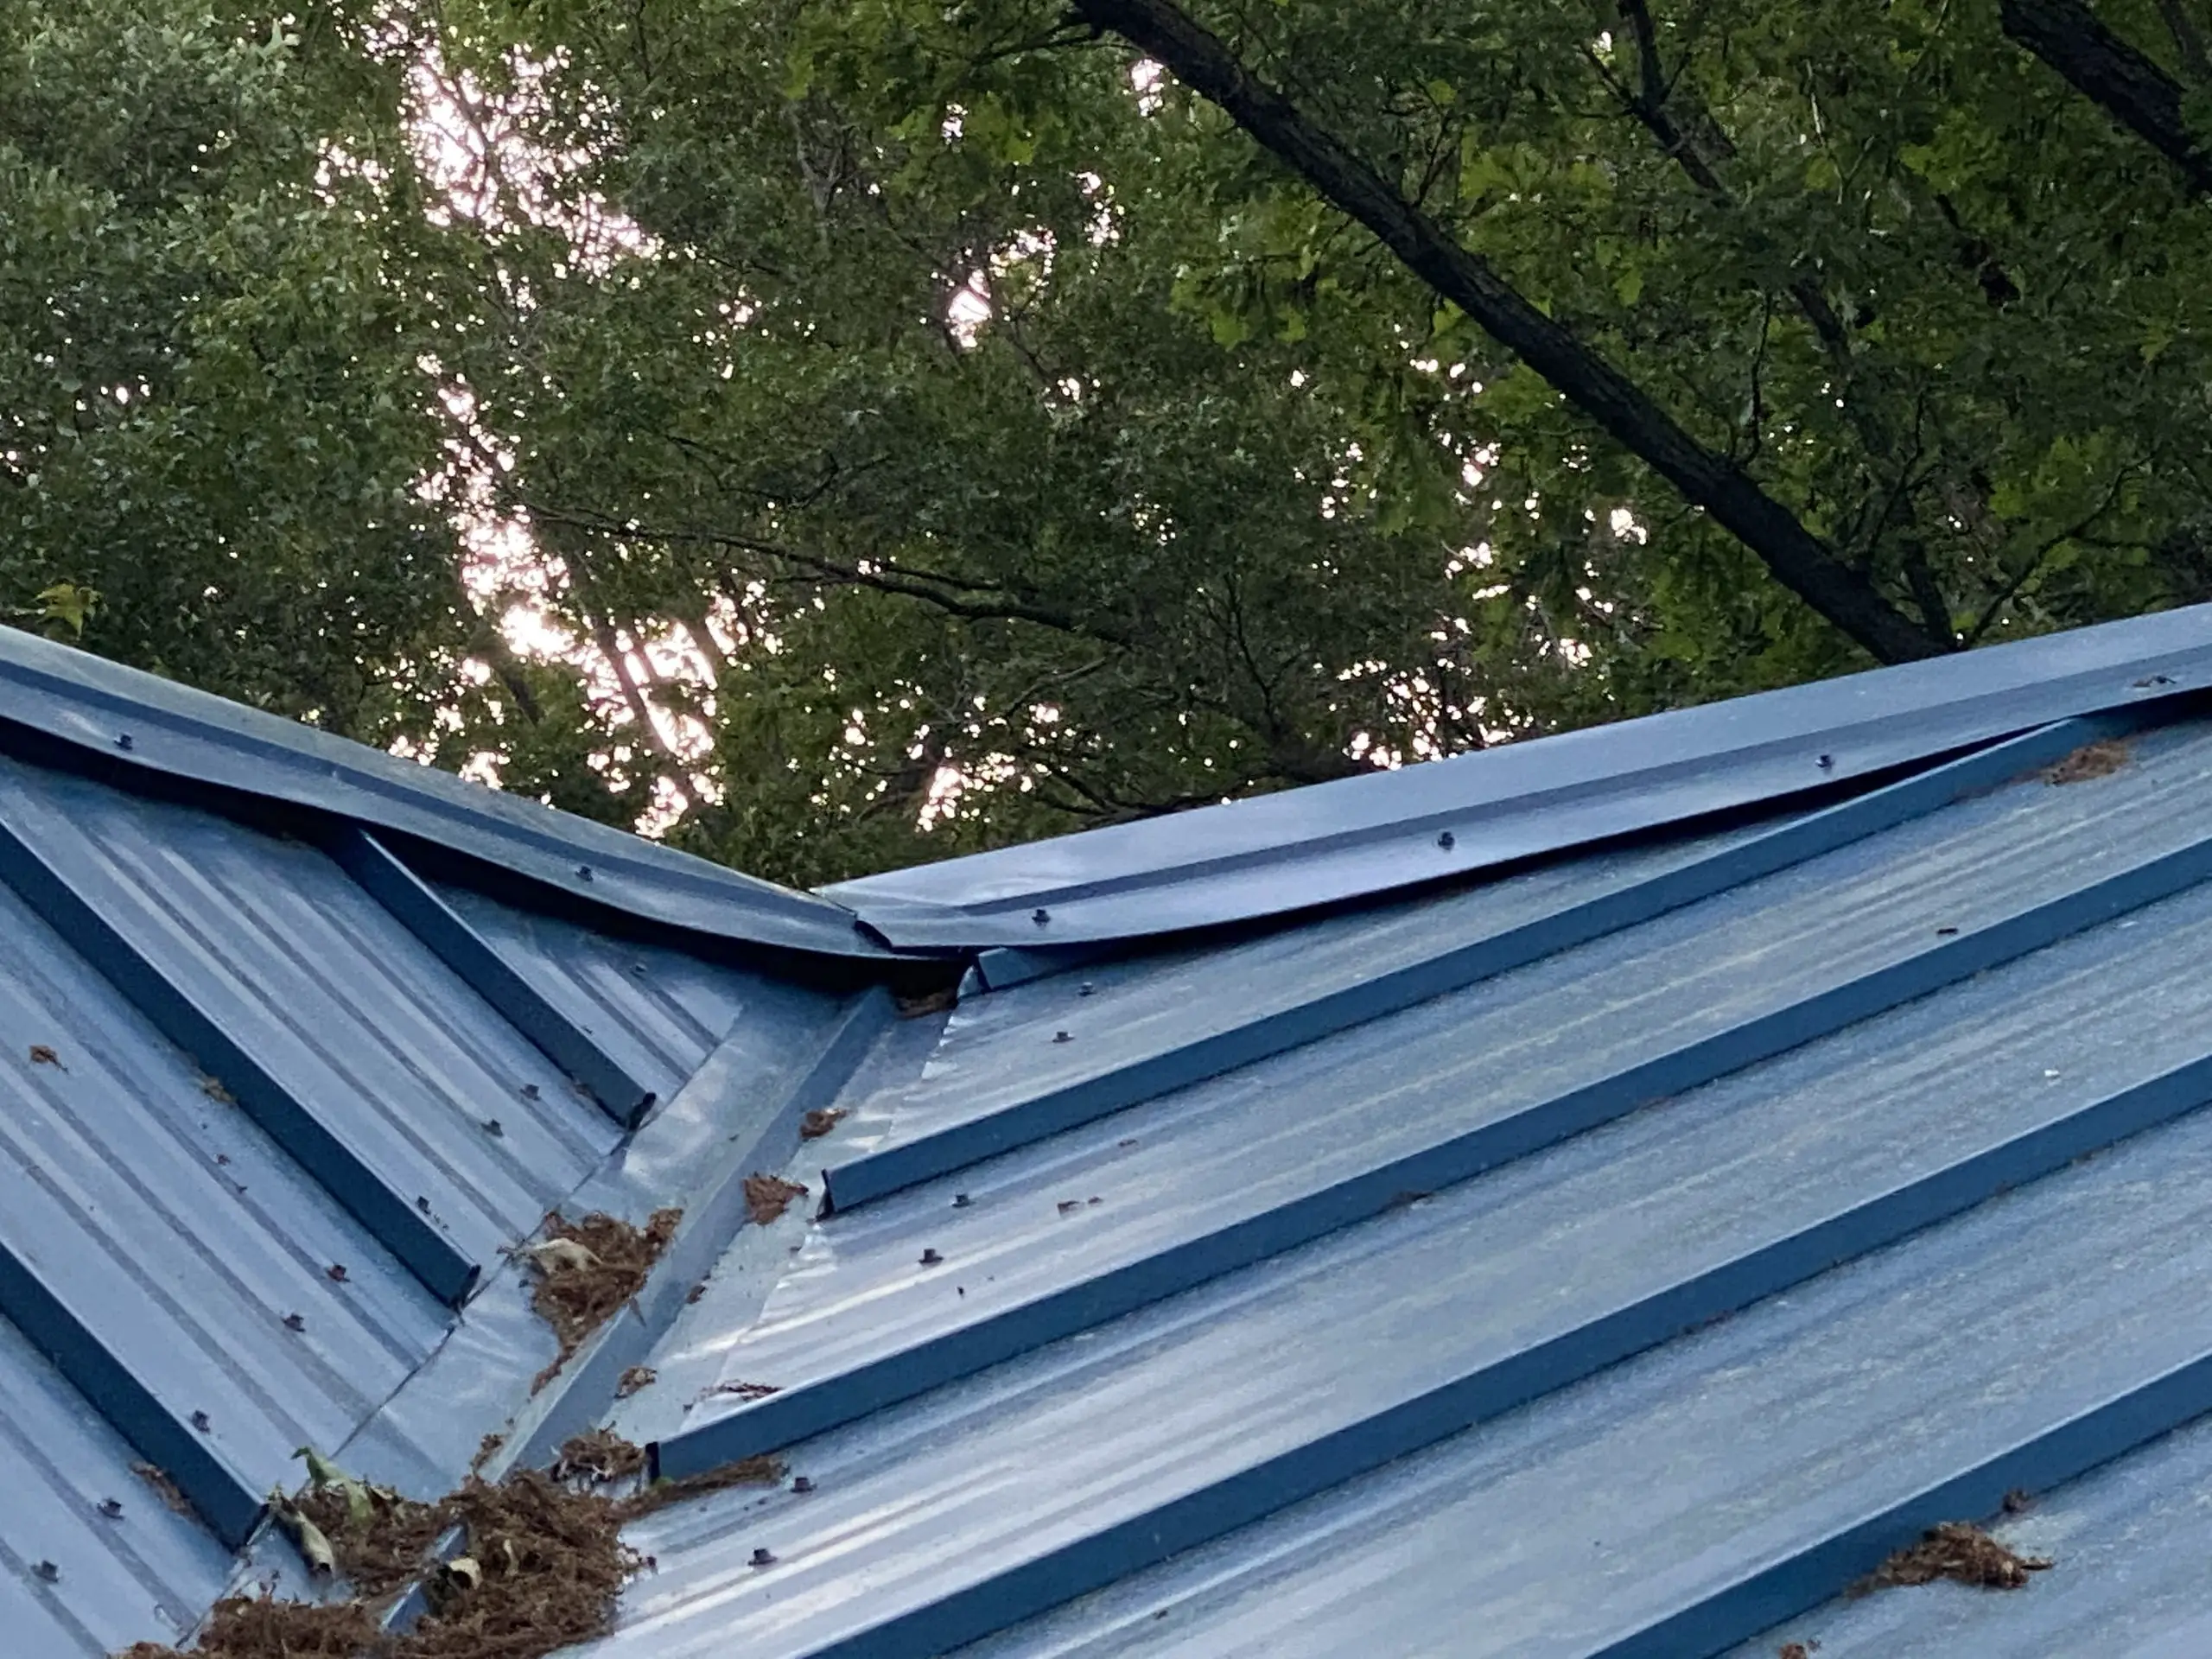 More Pictures of a Bad ...: " My Neighbor Metal Roof more ...